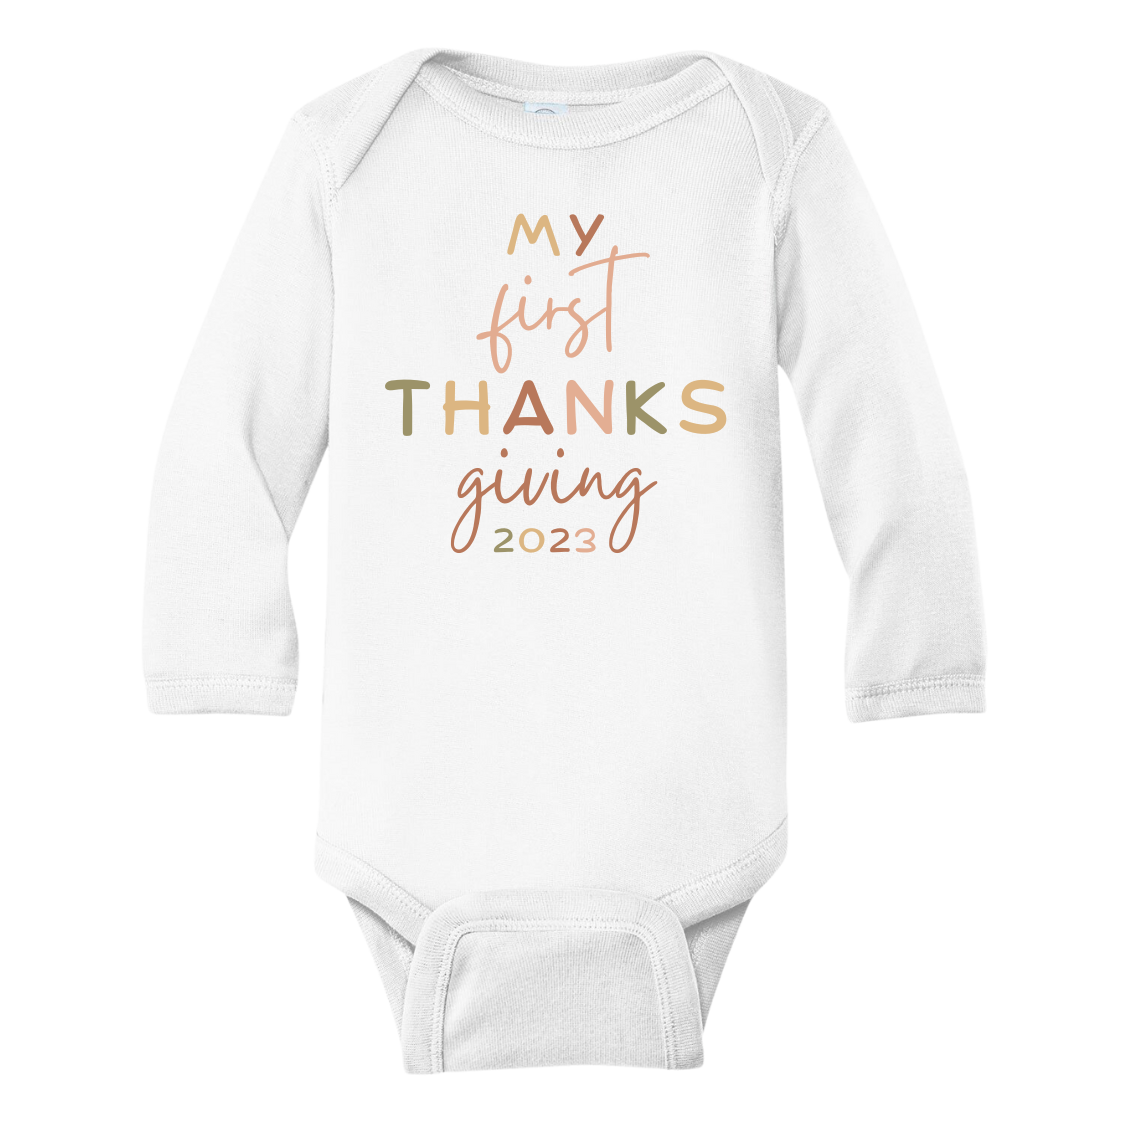 Baby Onsie - Cute Baby Onesie - Cute Baby Gift - Baby Clothes - Baby Bodysuit with cute 'My First Thanksgiving' text design.